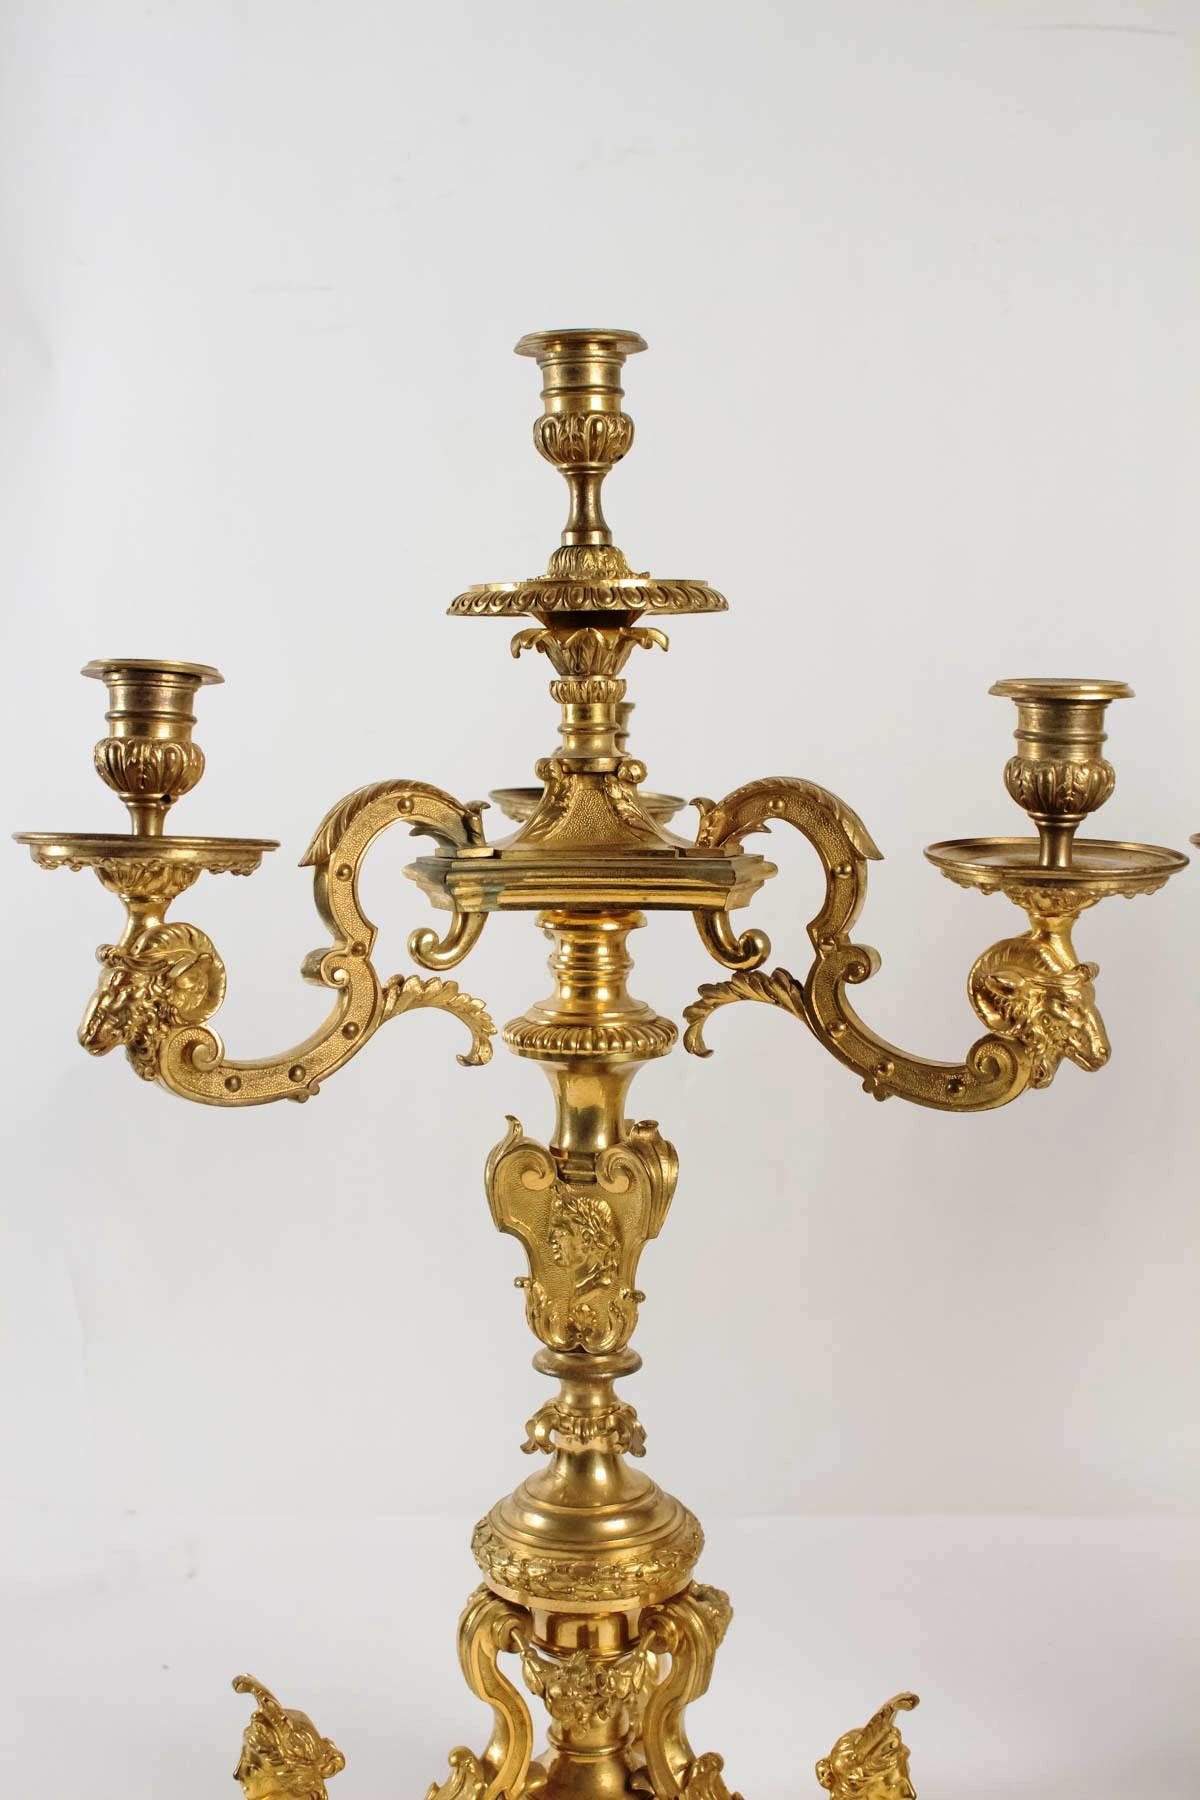 Rare pair of gilt bronze candelabras, after Andre - Charles Boulle, France , late 19th-early 20th century.
With amazing decor of Sphinges, rams' heads, and roman emperor's bust.
4 Lights on each candelabra.
Mat and polished bronze,
Provenance: